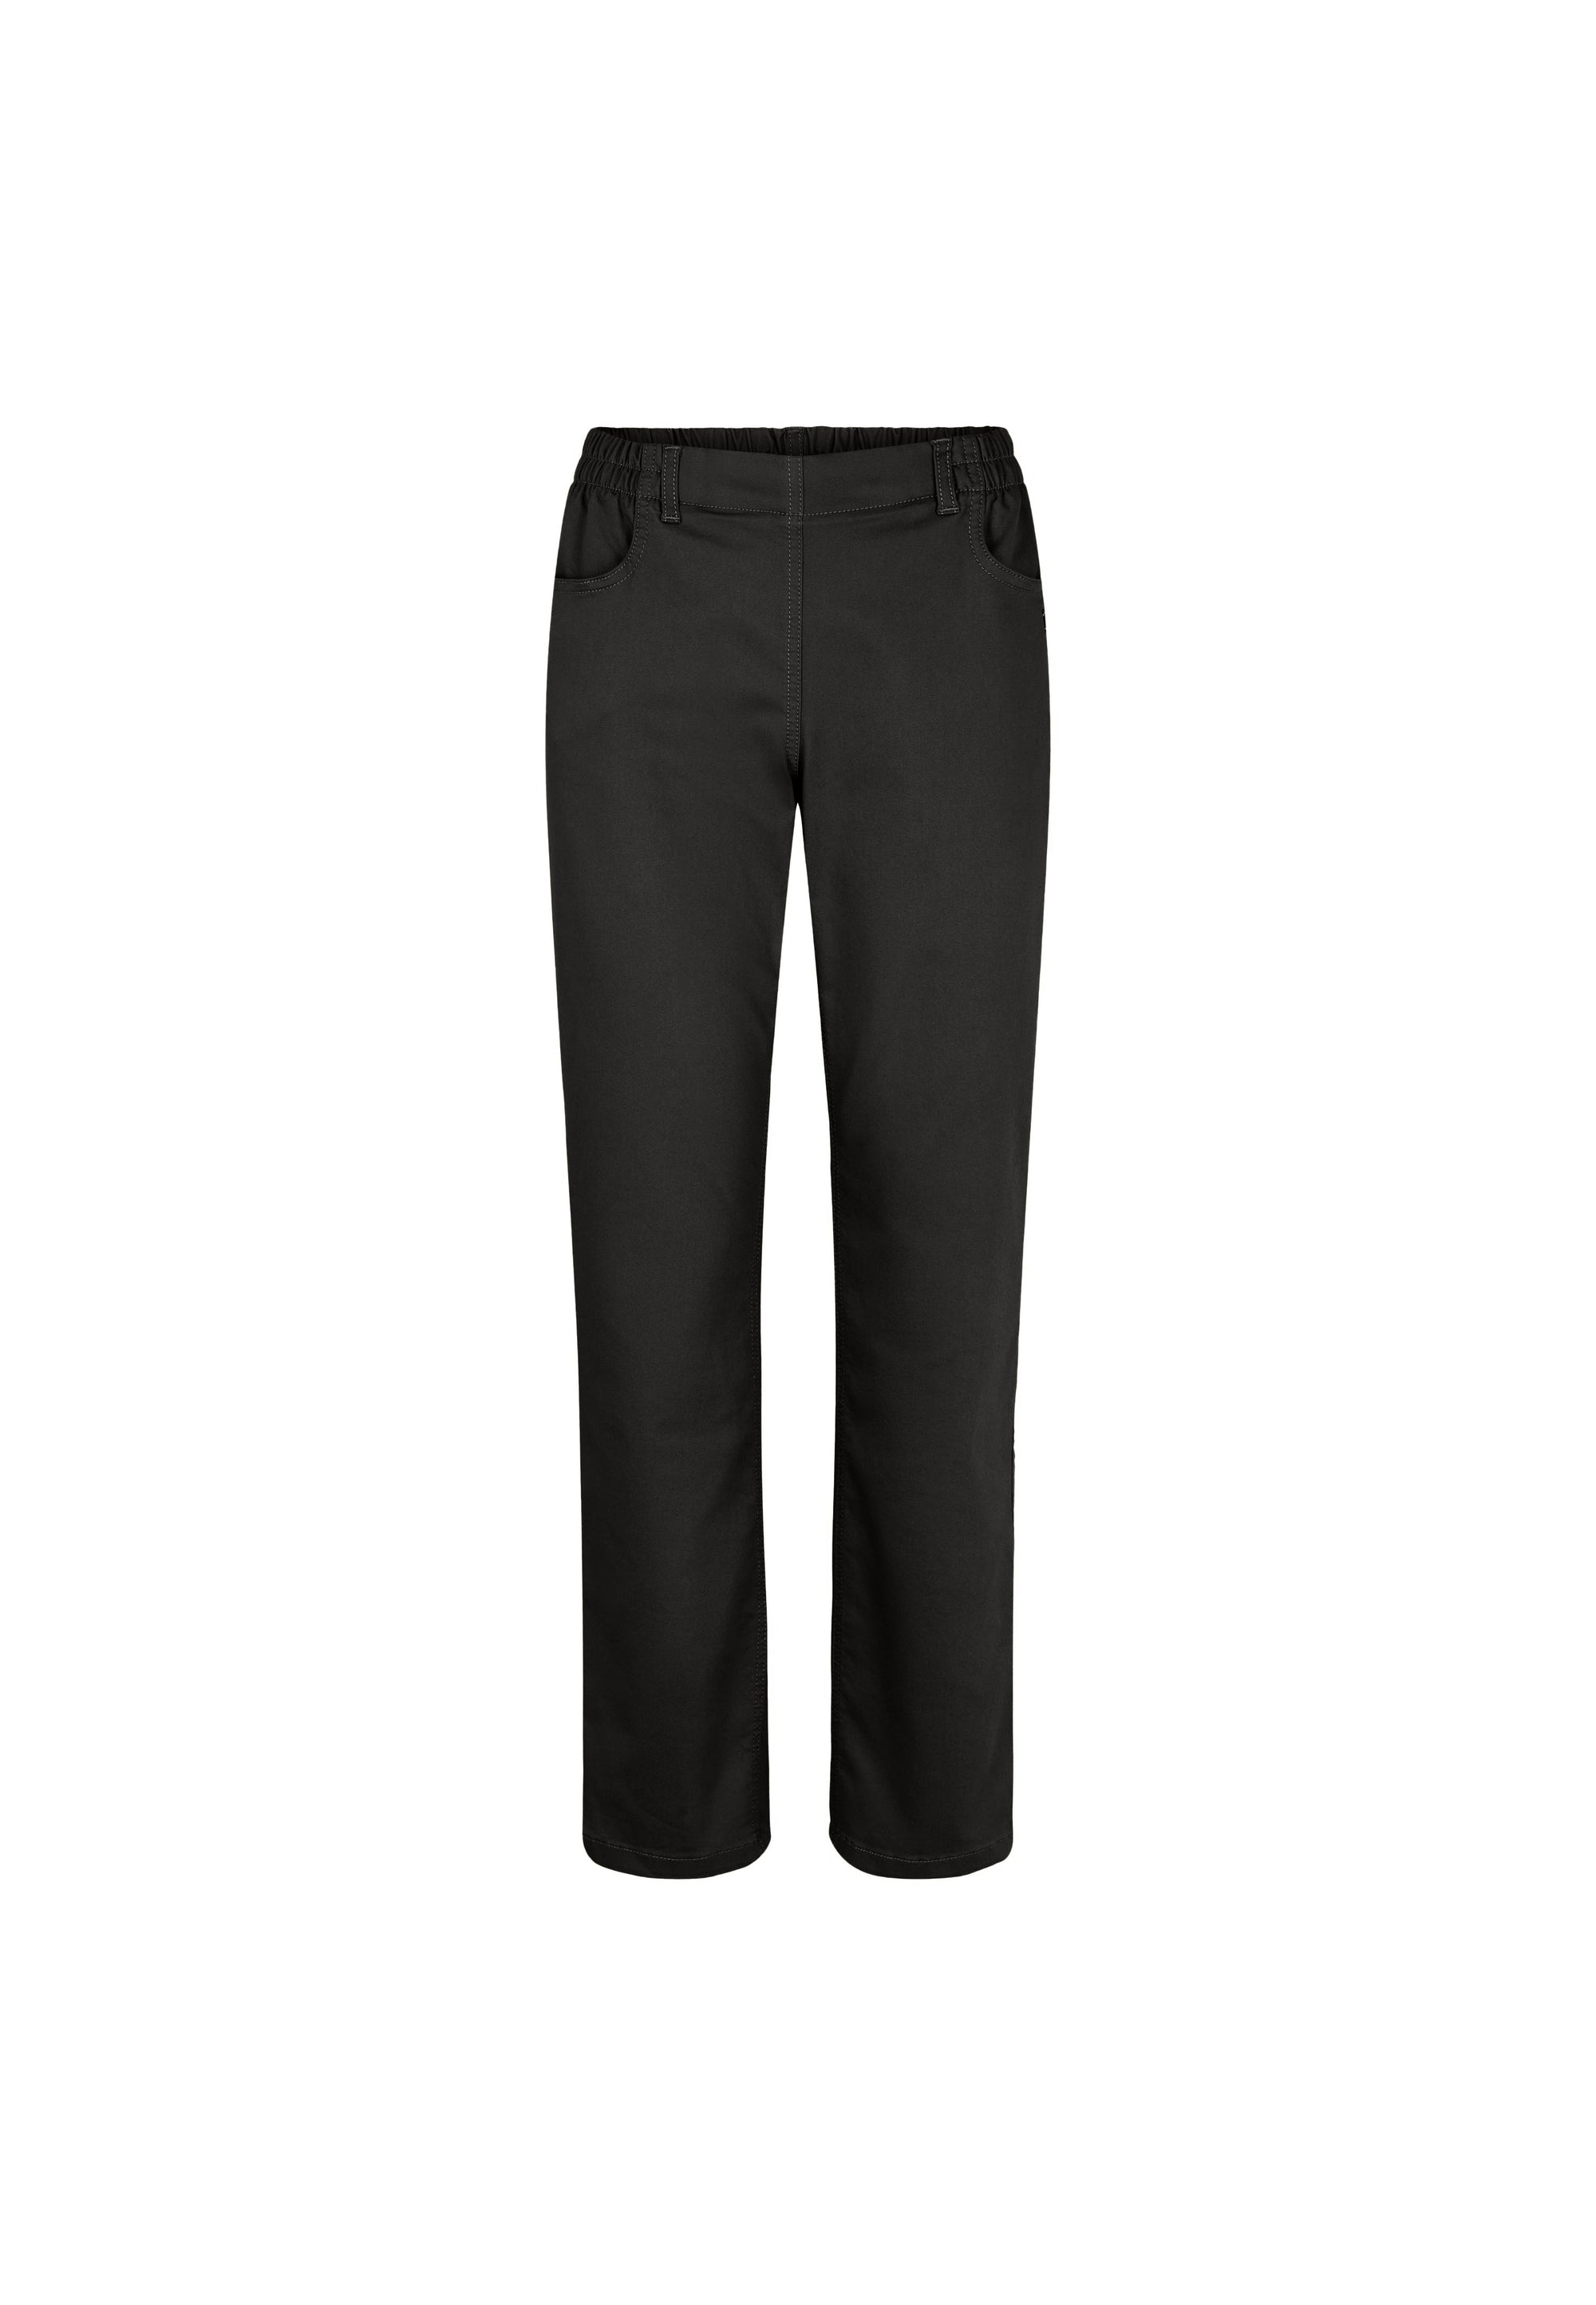 LAURIE Violet Relaxed - Medium Length Trousers RELAXED 99100 Black